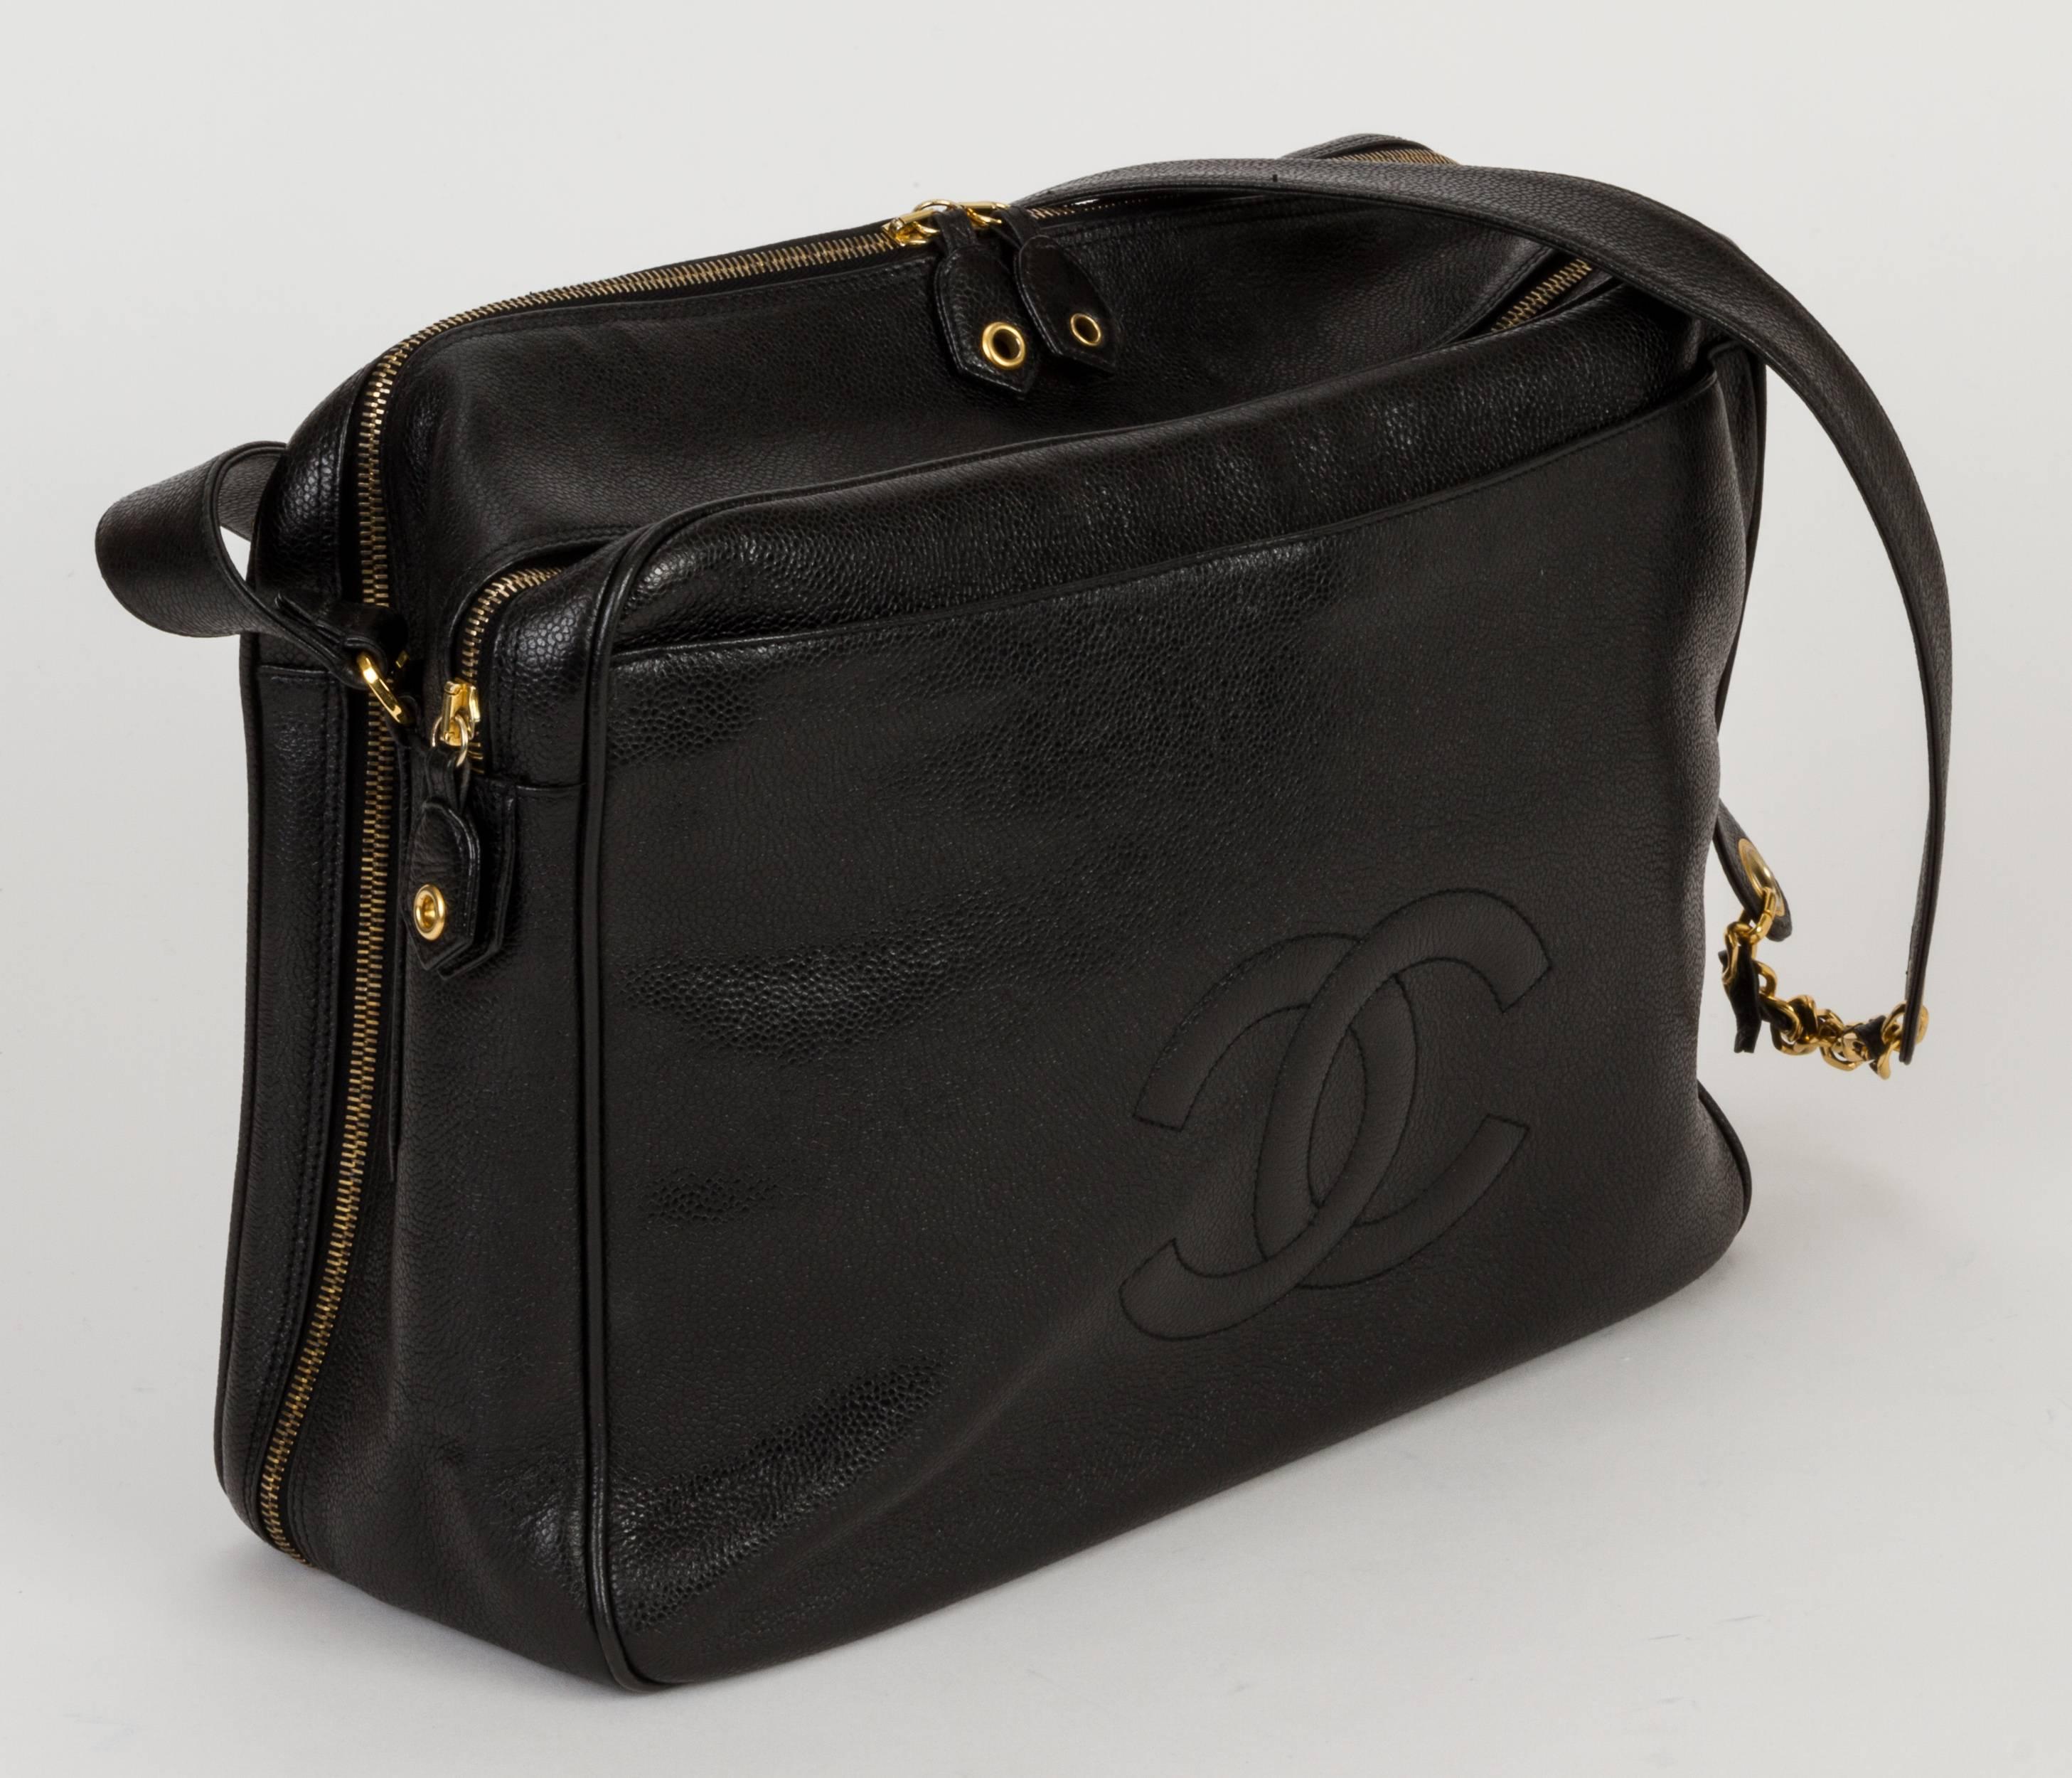 1990s Chanel computer bag/shoulder document bag. Excellent condition for very durable black caviar leather with gold-plated hardware. Comes with original padlock, keys, key holder and original dust bag.
